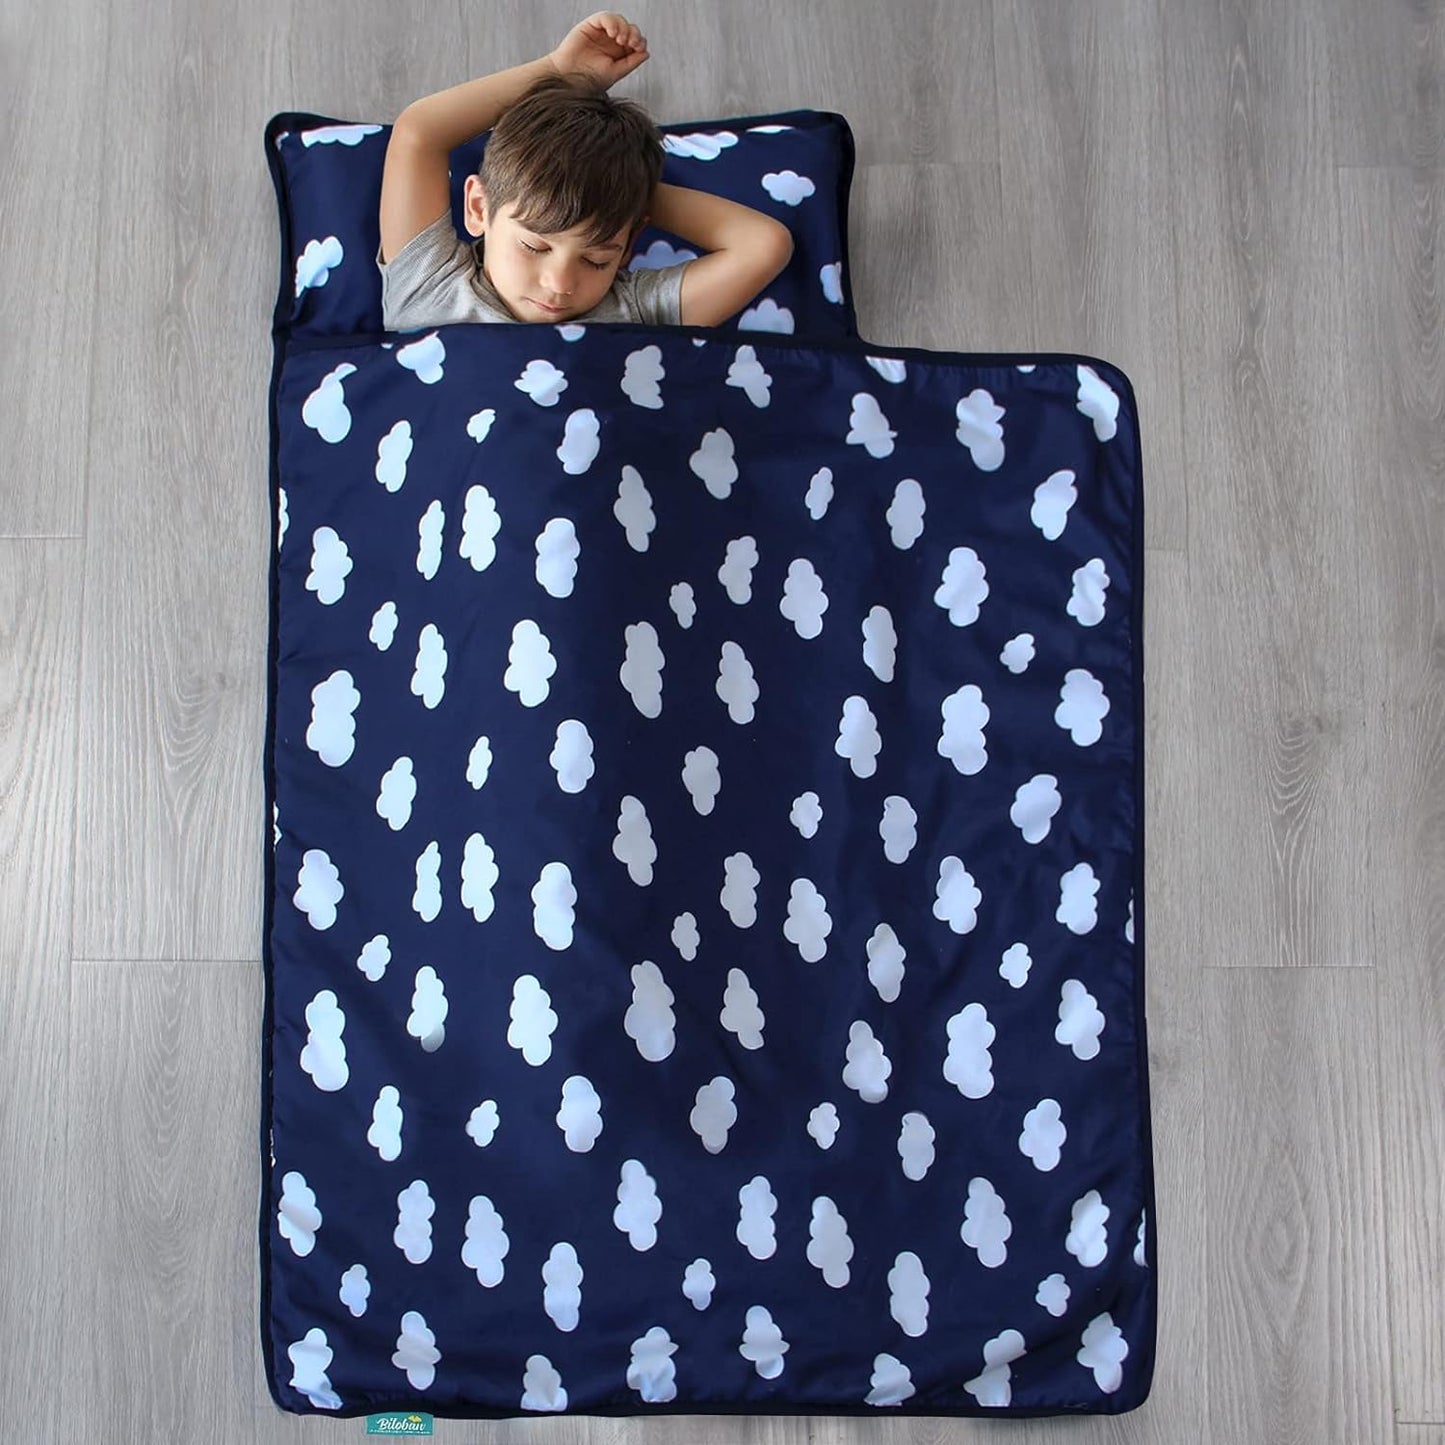 Toddler Nap Mat with Removable Pillow and Blanket, Lightweight Kids Nap Mats for Preschool Daycare, Travel Sleeping Bag for Boys Girls, 50" x 21" Fit Standard Cot, Super Soft and Cozy, Navy Cloud - Biloban Online Store